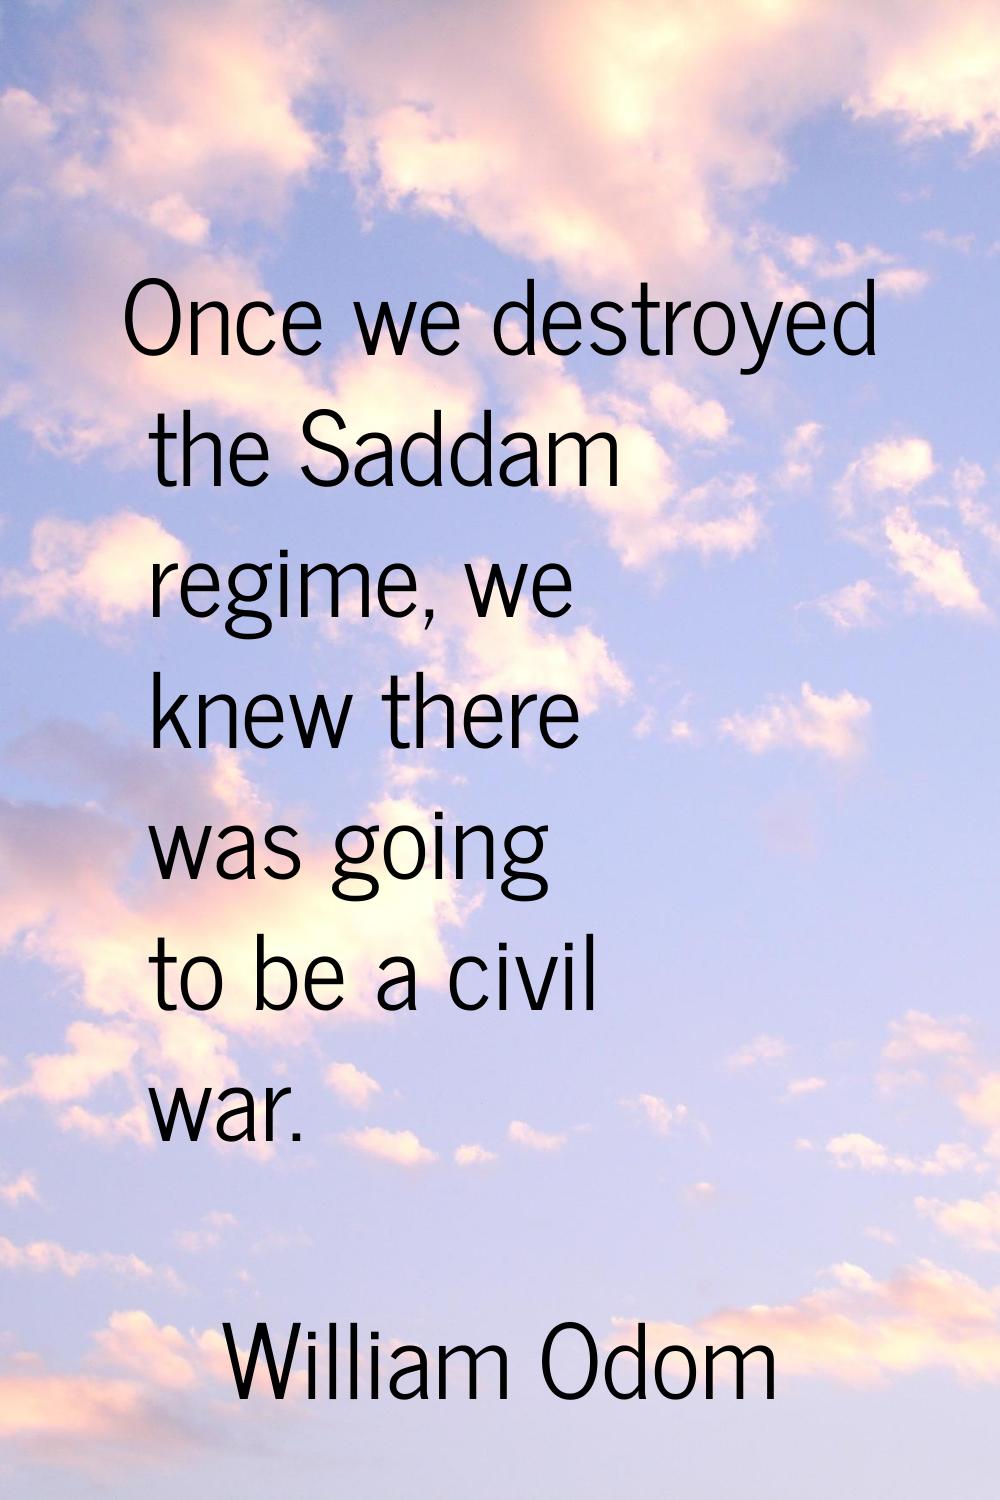 Once we destroyed the Saddam regime, we knew there was going to be a civil war.